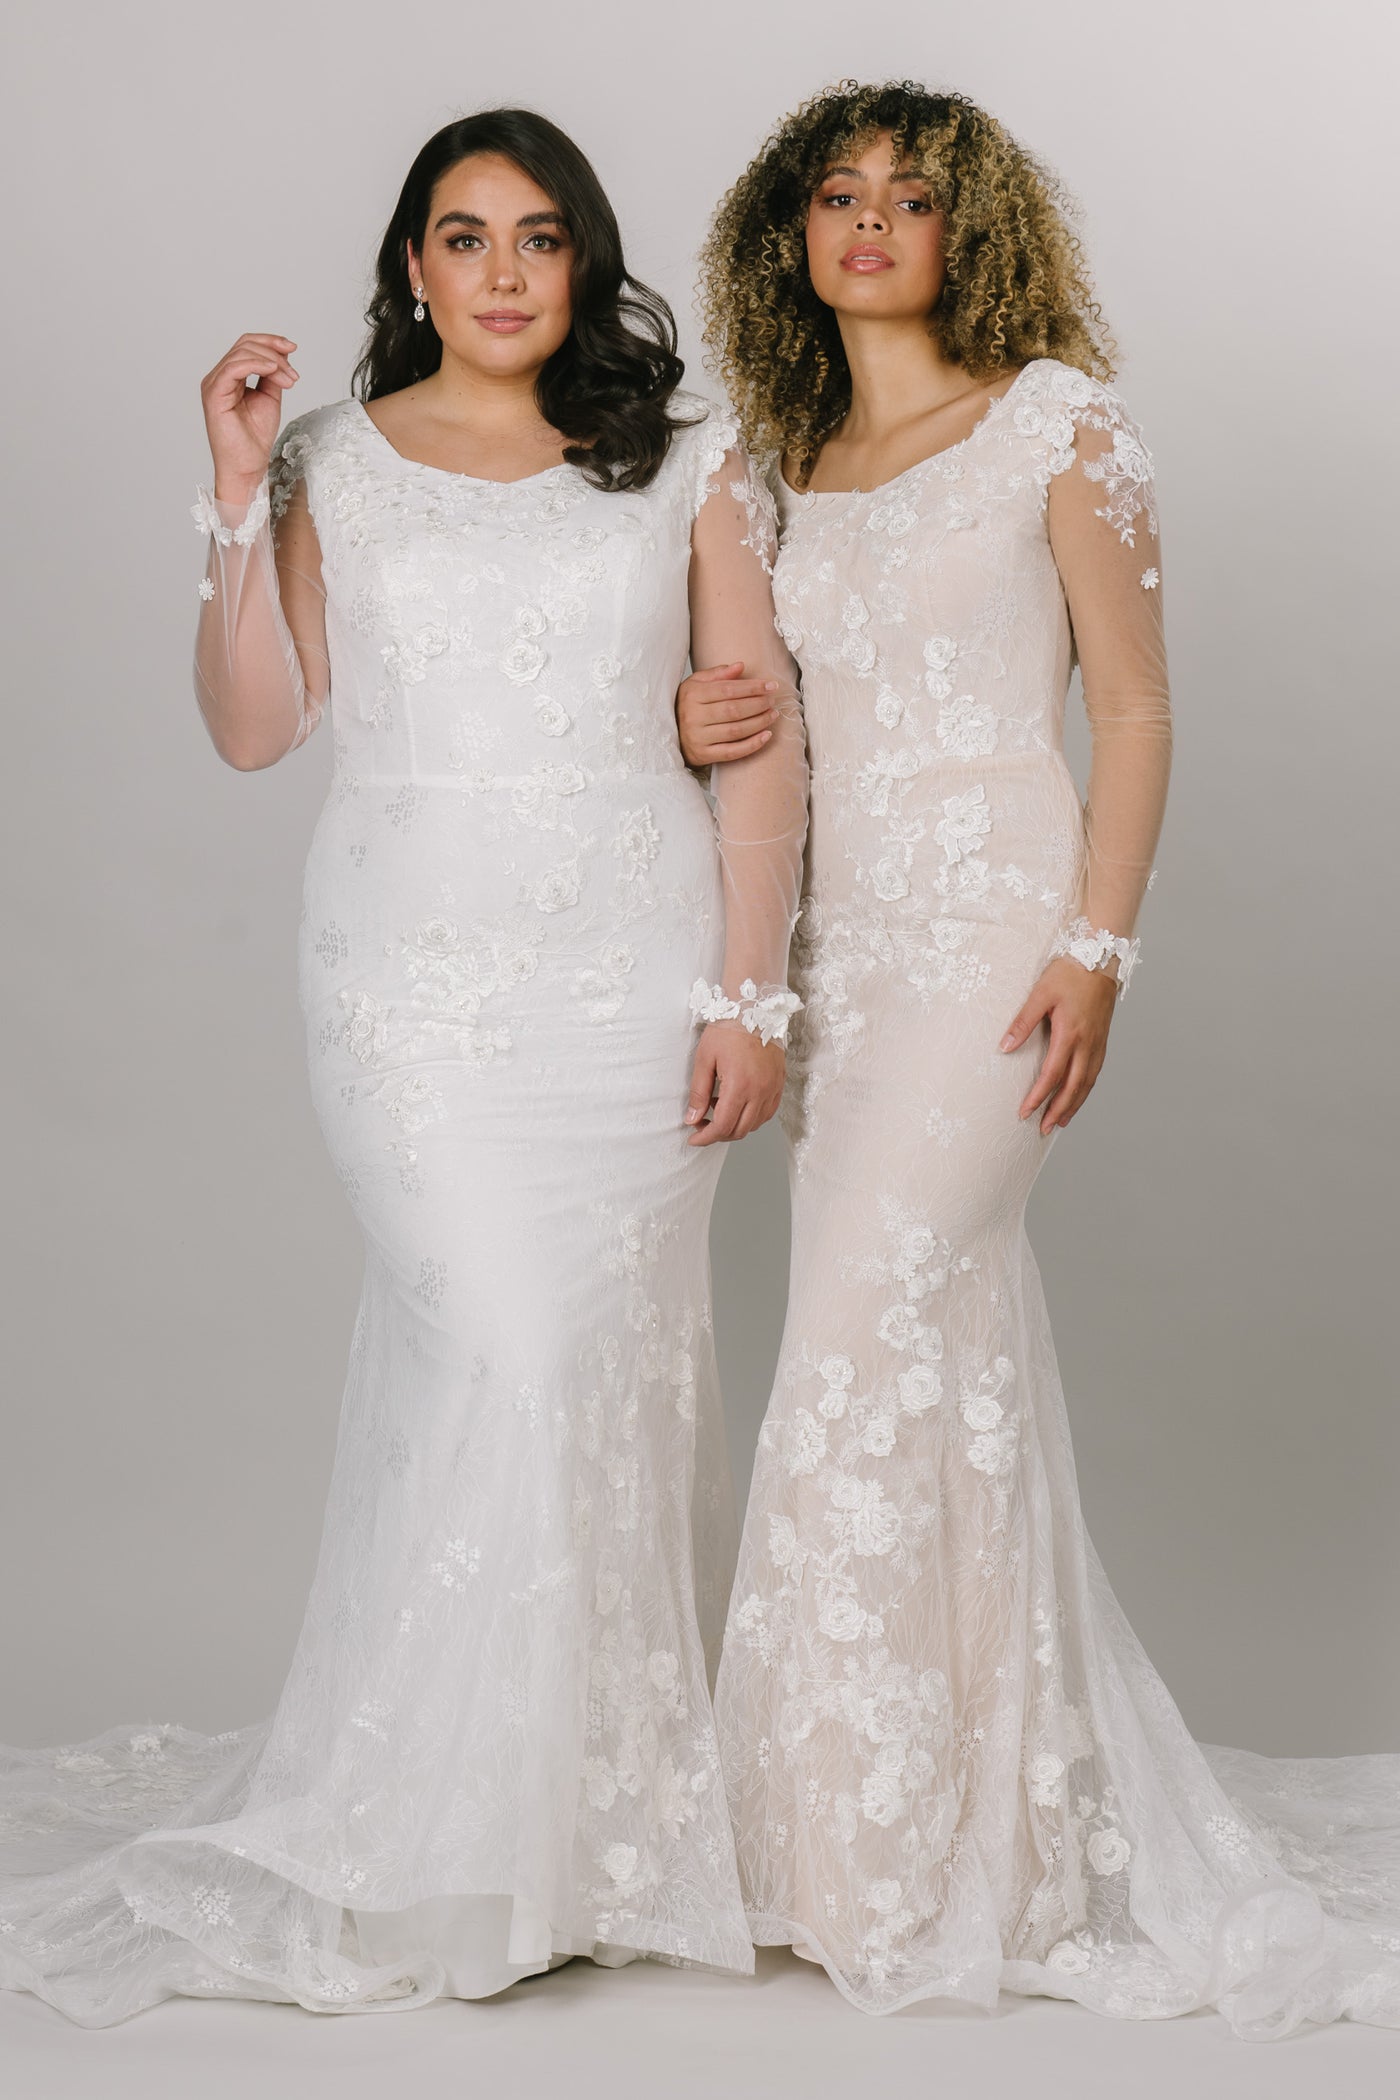 Two models showcasing the dress in white and nude. This modest wedding dress comes in many sides. 